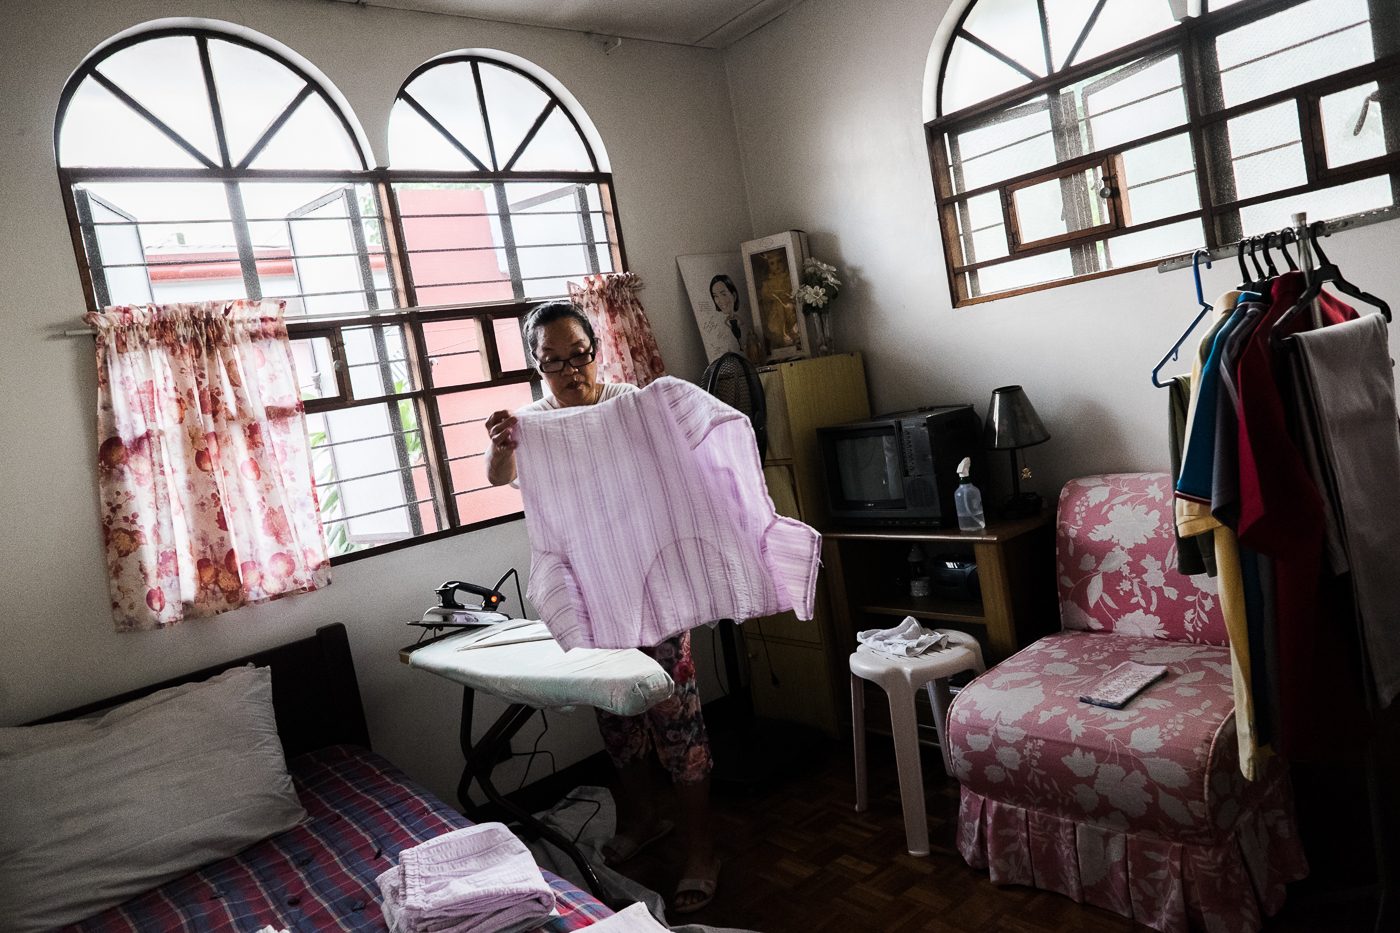 ASEAN urged to protect ‘invisible’ domestic workers